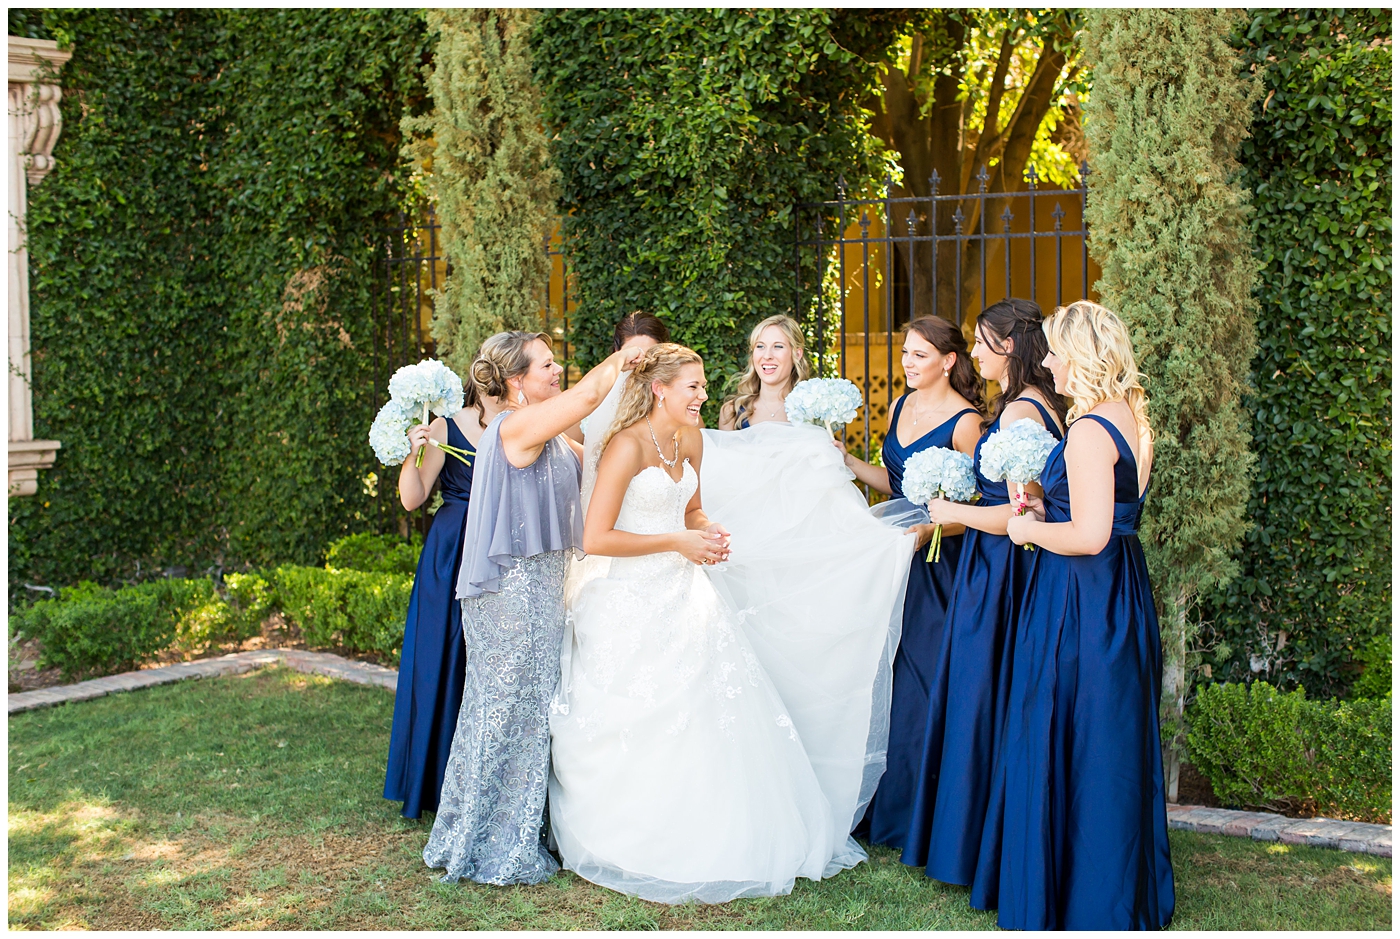 bride in strapless lace dress with white flower bouquet with roses and hydrangeas with bridesmaids in royal blue long dresses with blue hydrangeas bouquets getting ready on wedding day